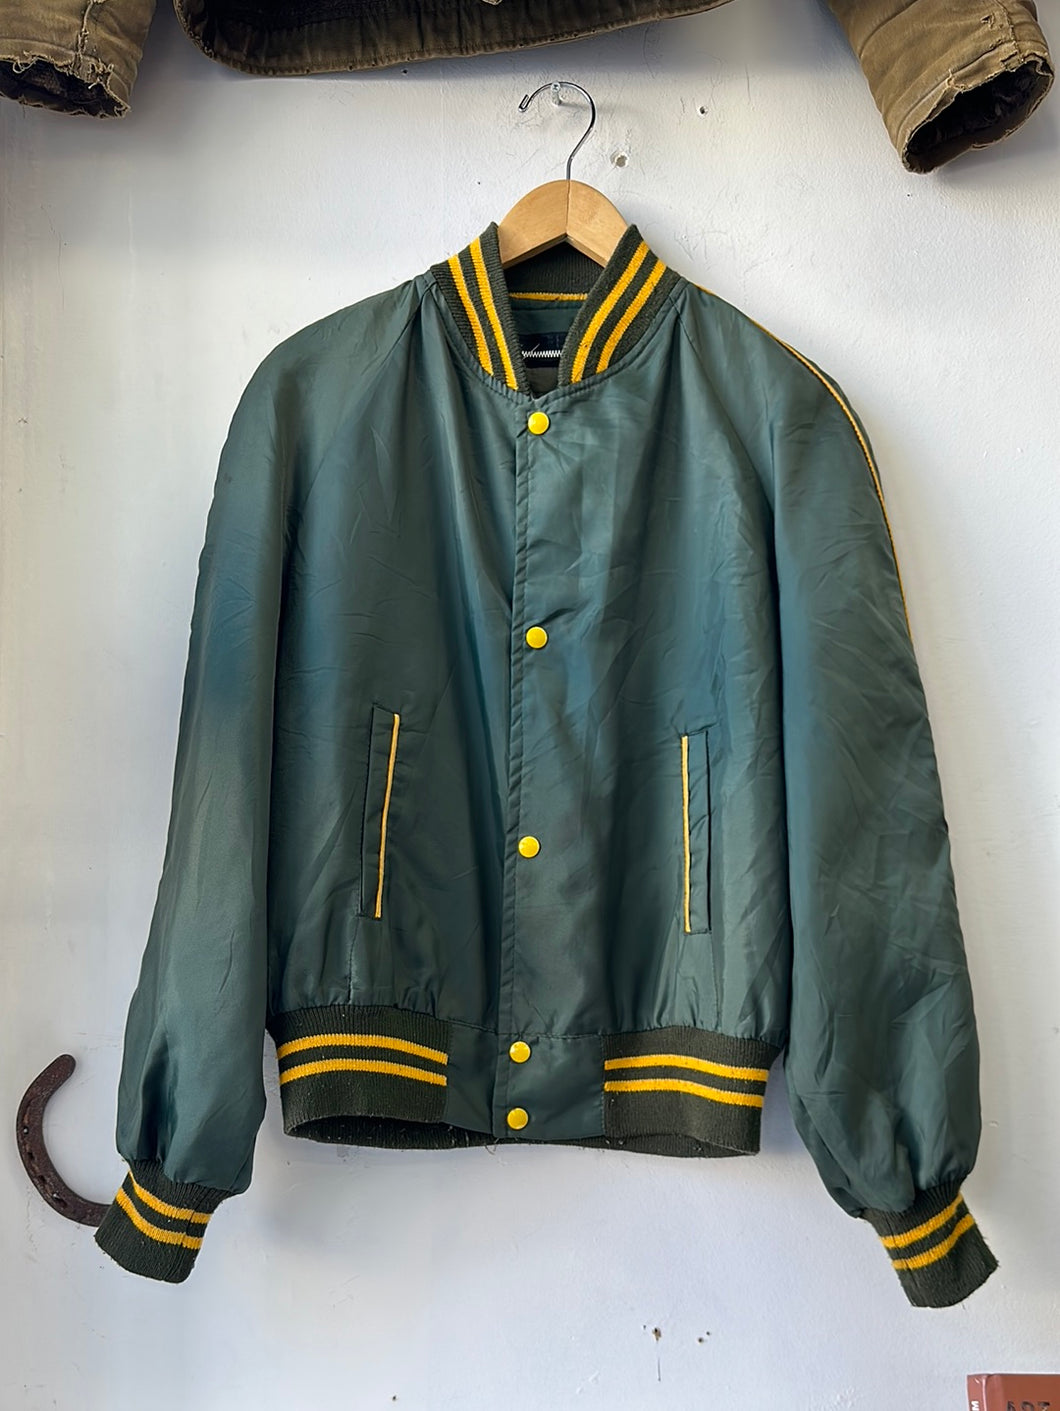 1980s Nylon Jacket “Forces Canadiennes” w/ Liner